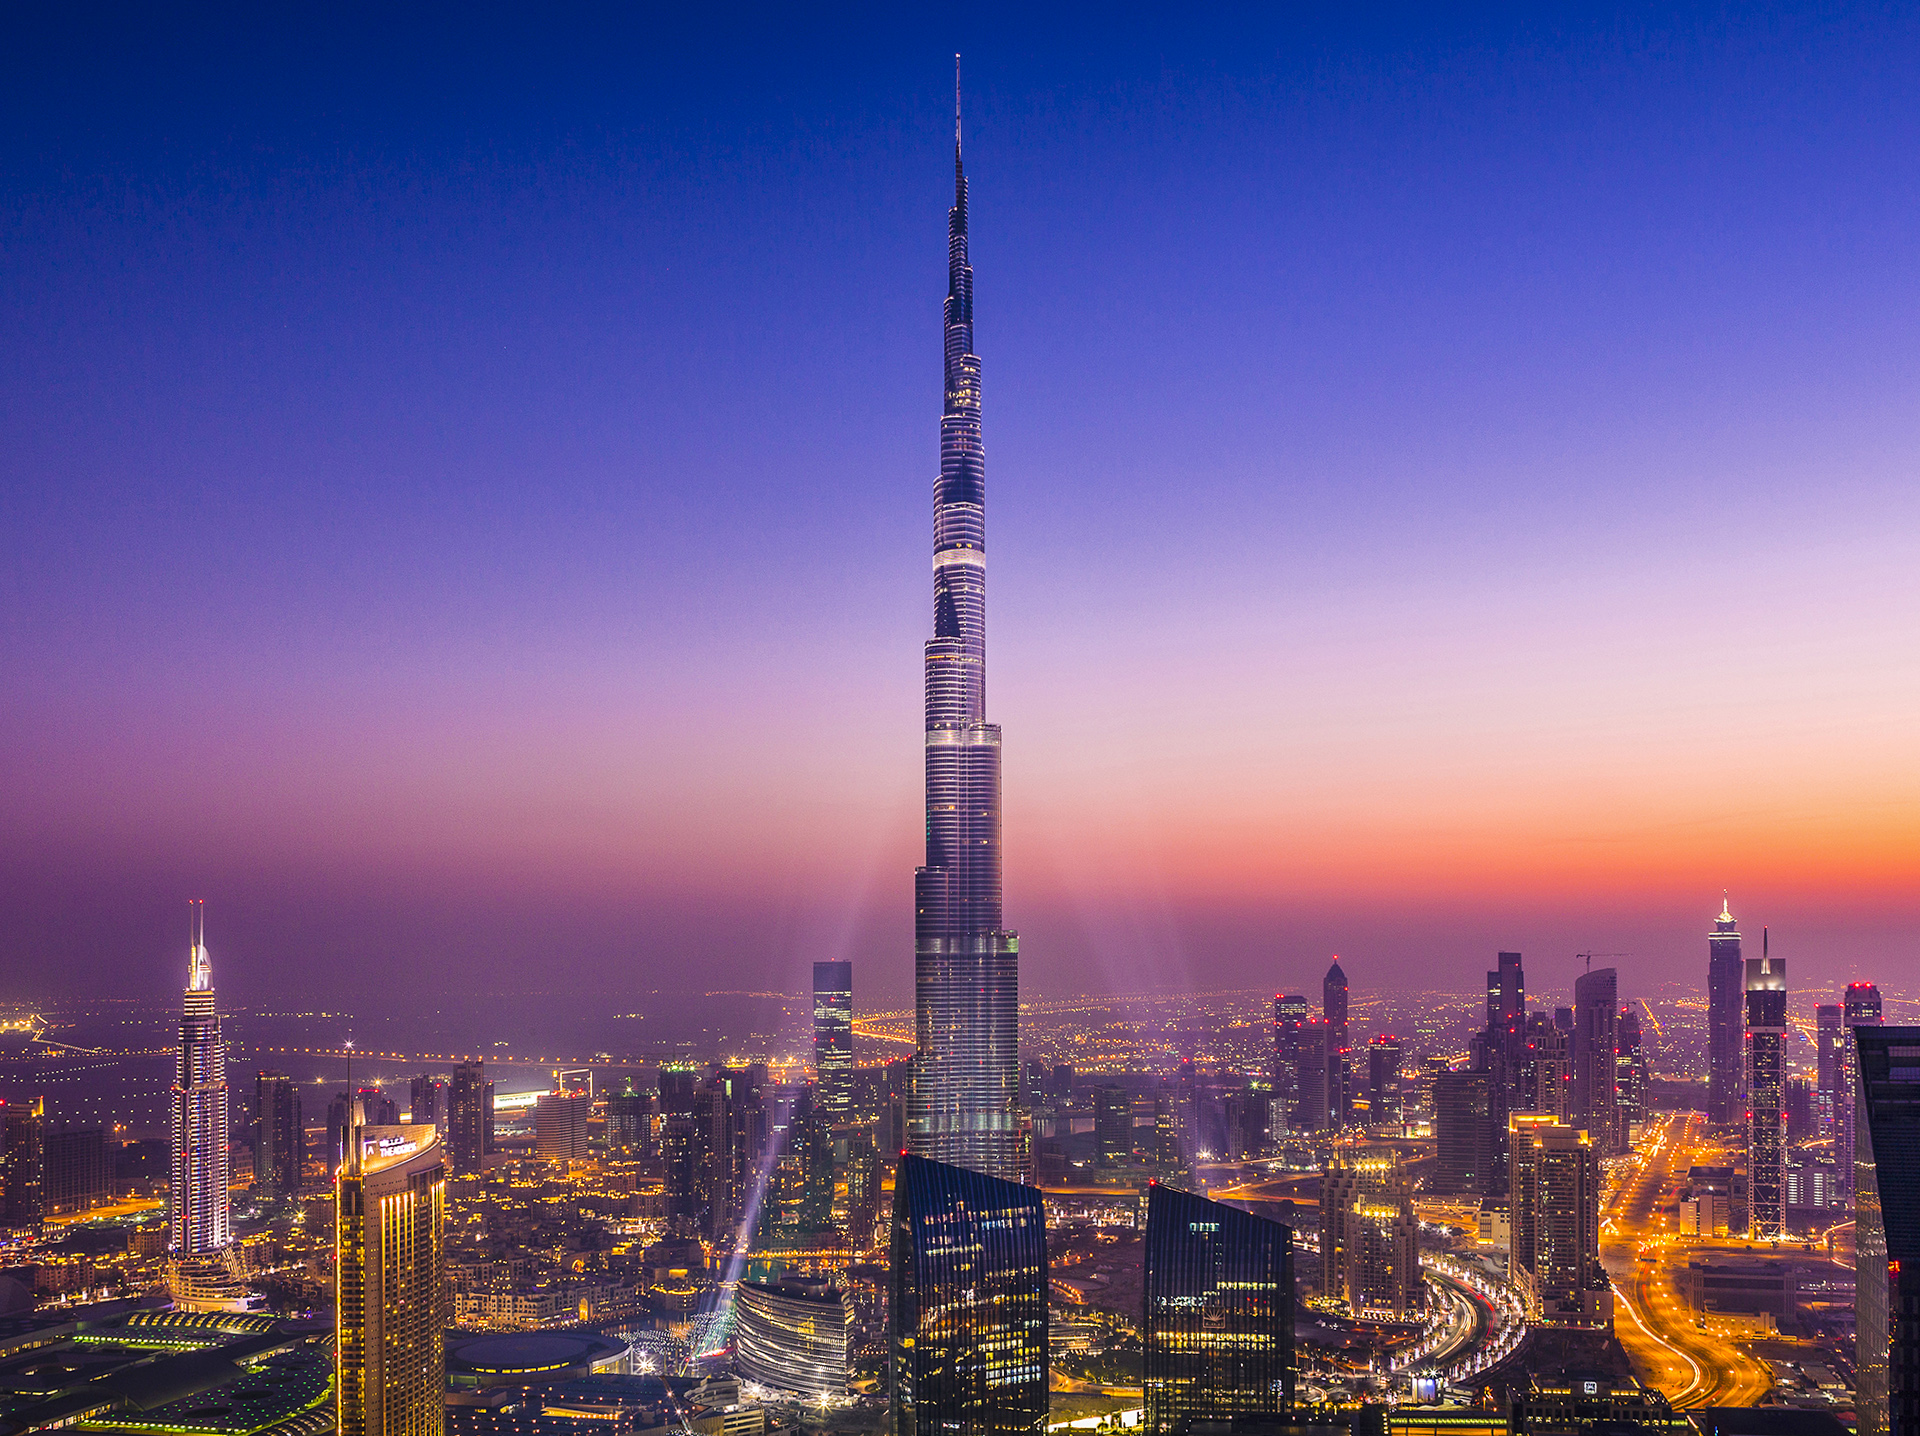 Dubai attracts 7.12 million international visitors between January and June